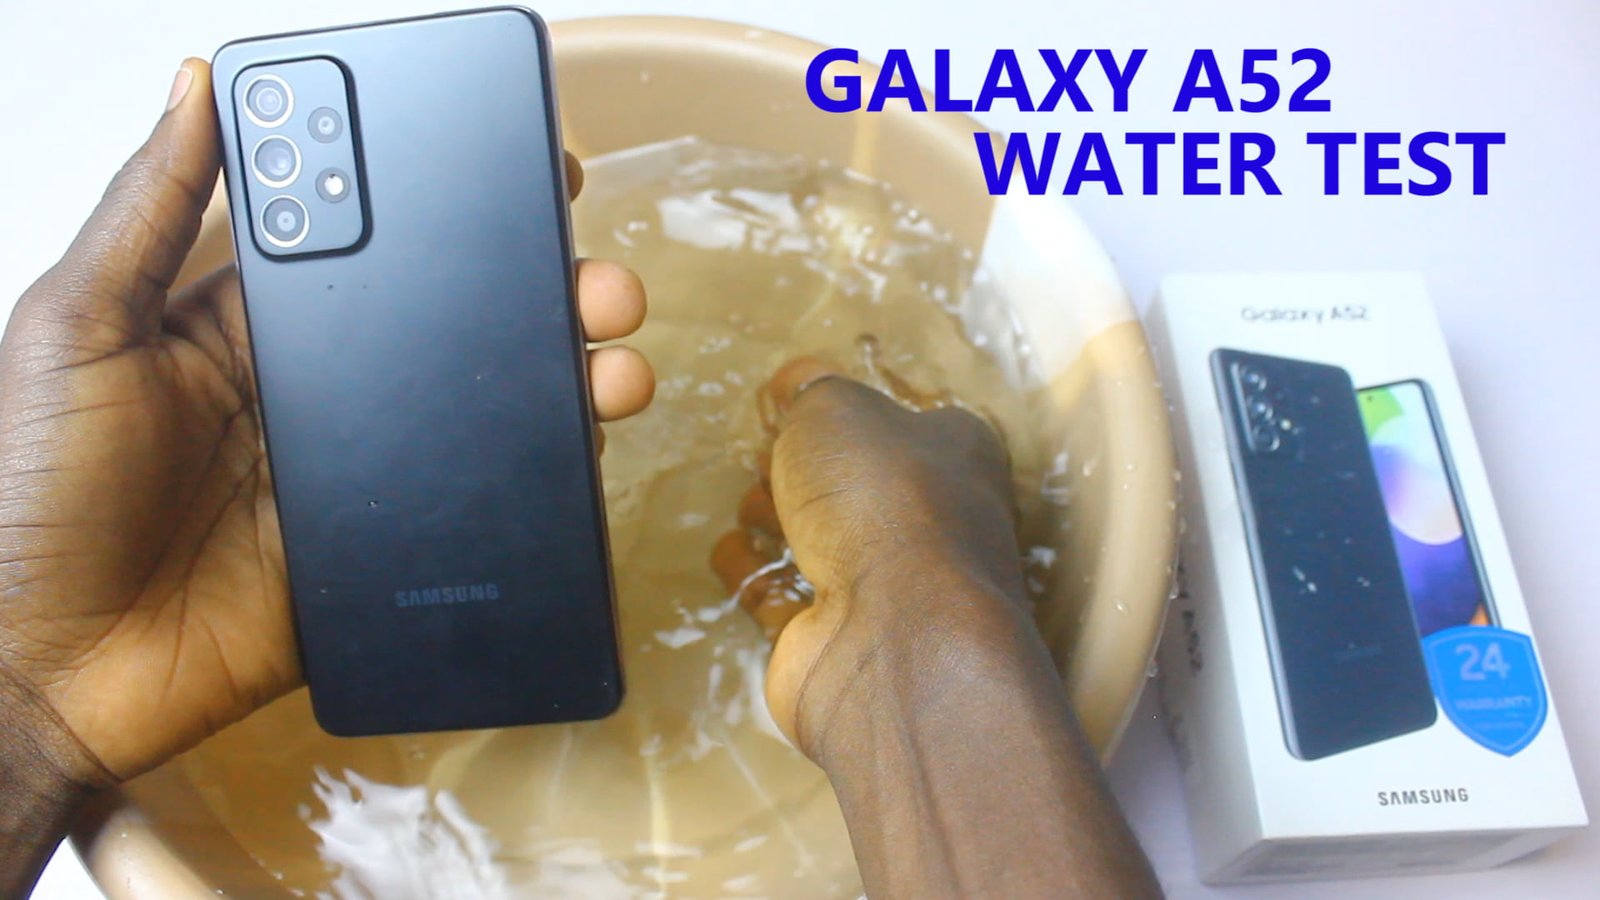 Samsung Galaxy A52 water test was Successful with no fault